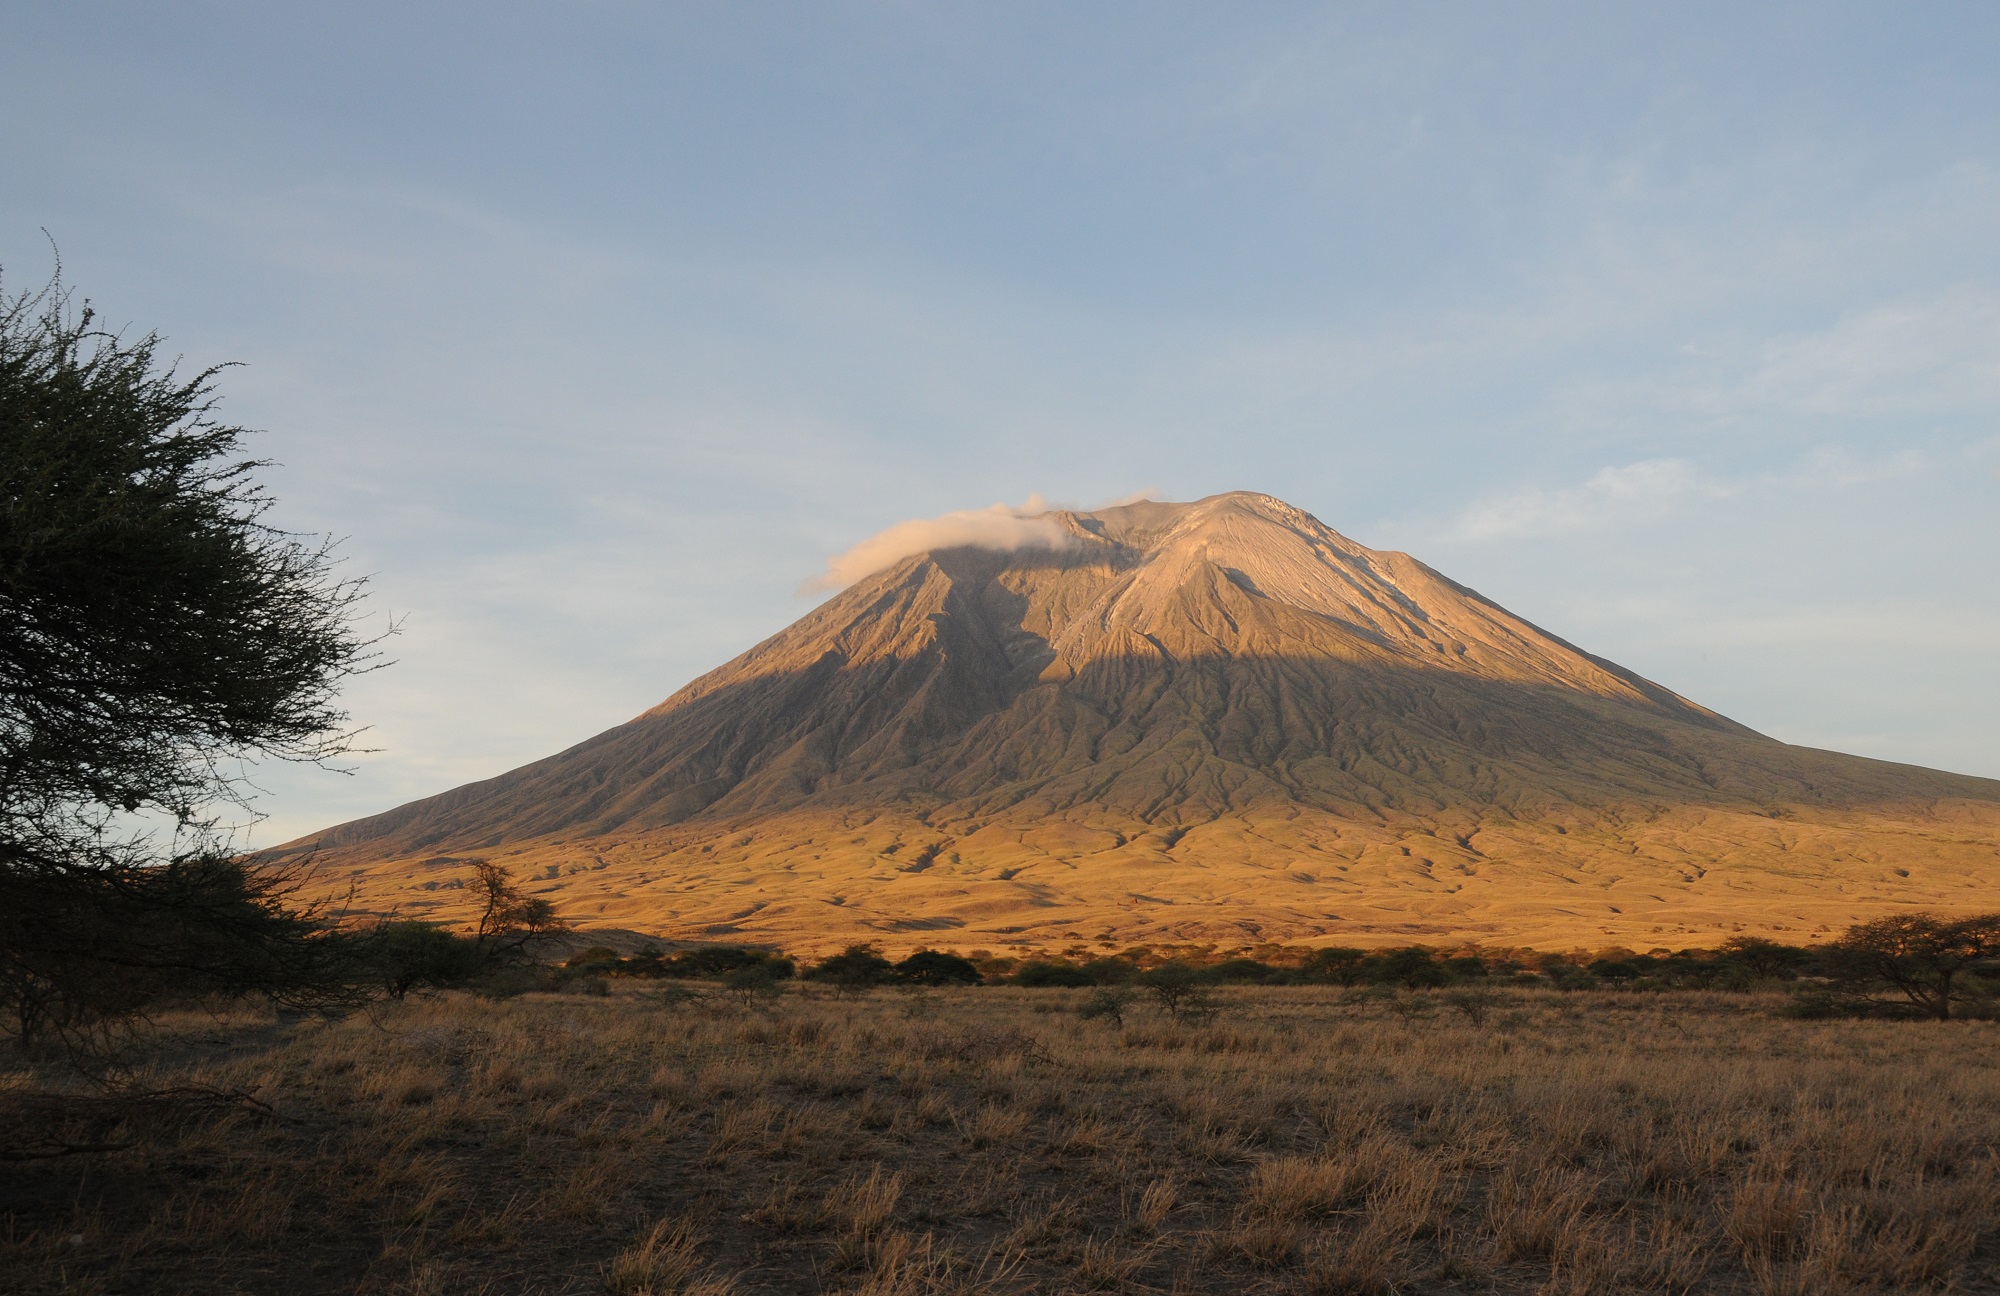 the sacred volcano of the Masai dawn...